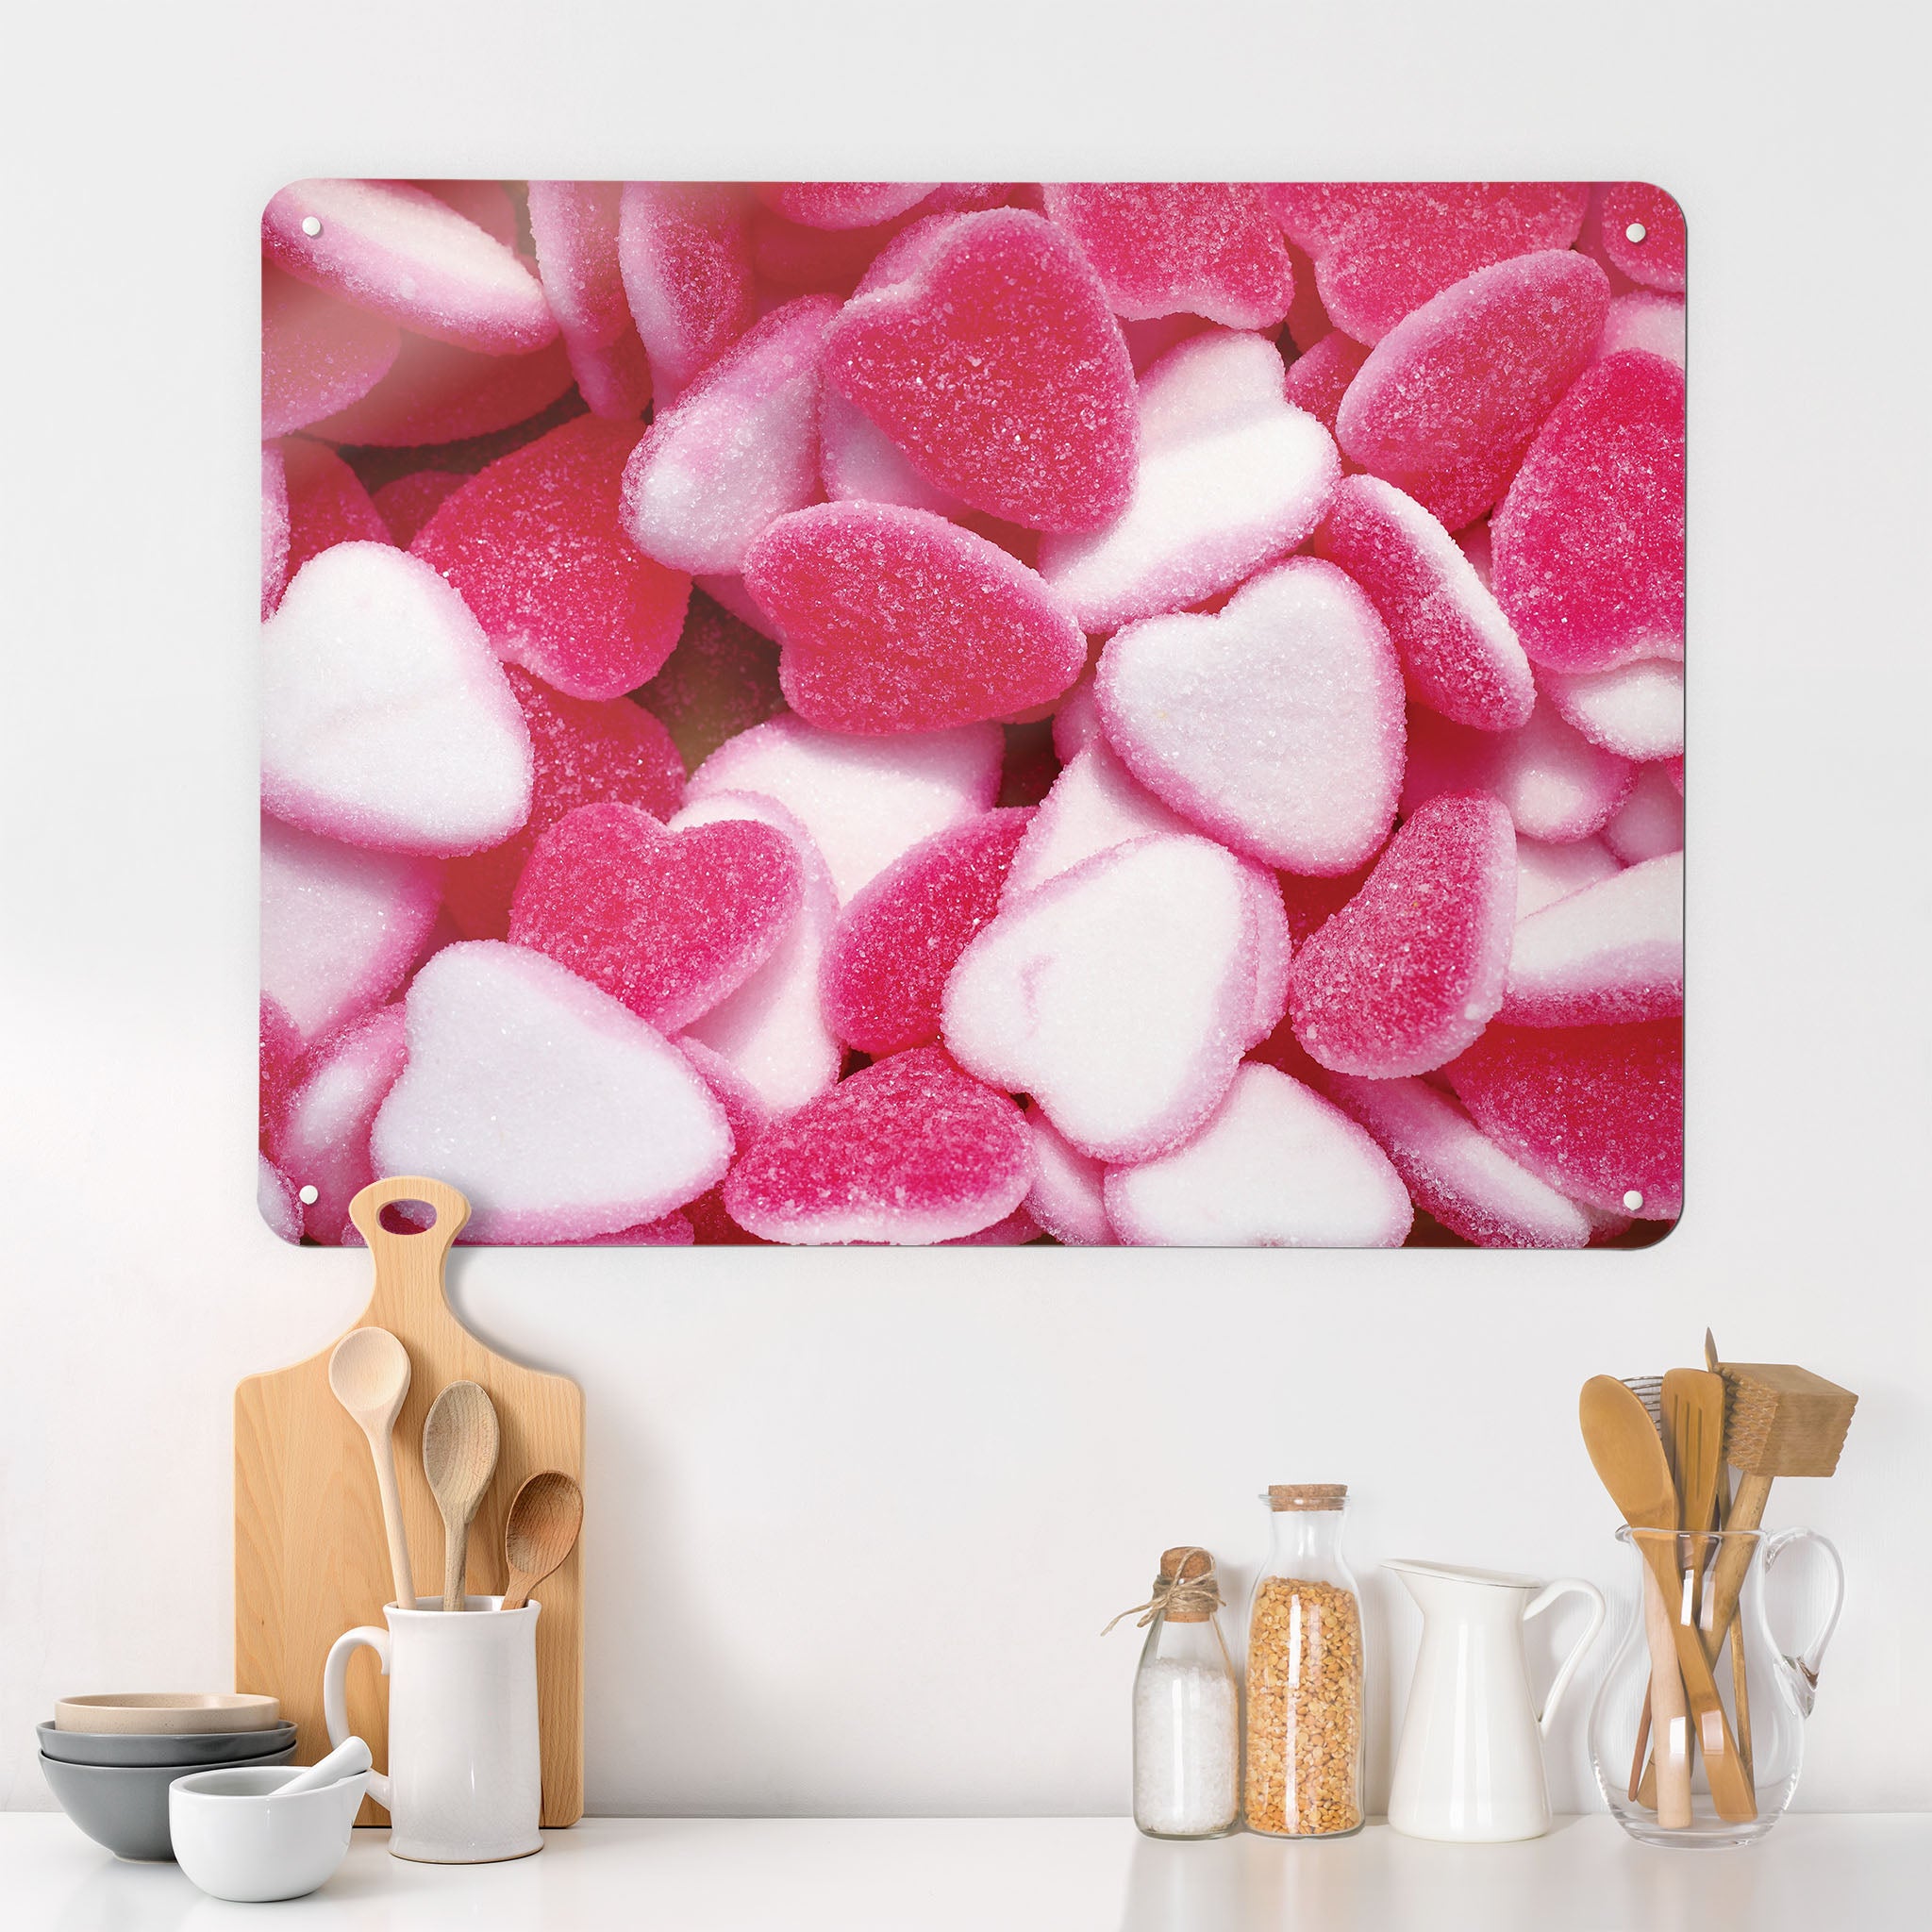 A desk in a kitchen interior with a magnetic metal wall art panel showing a photograph of pink heart shaped candy